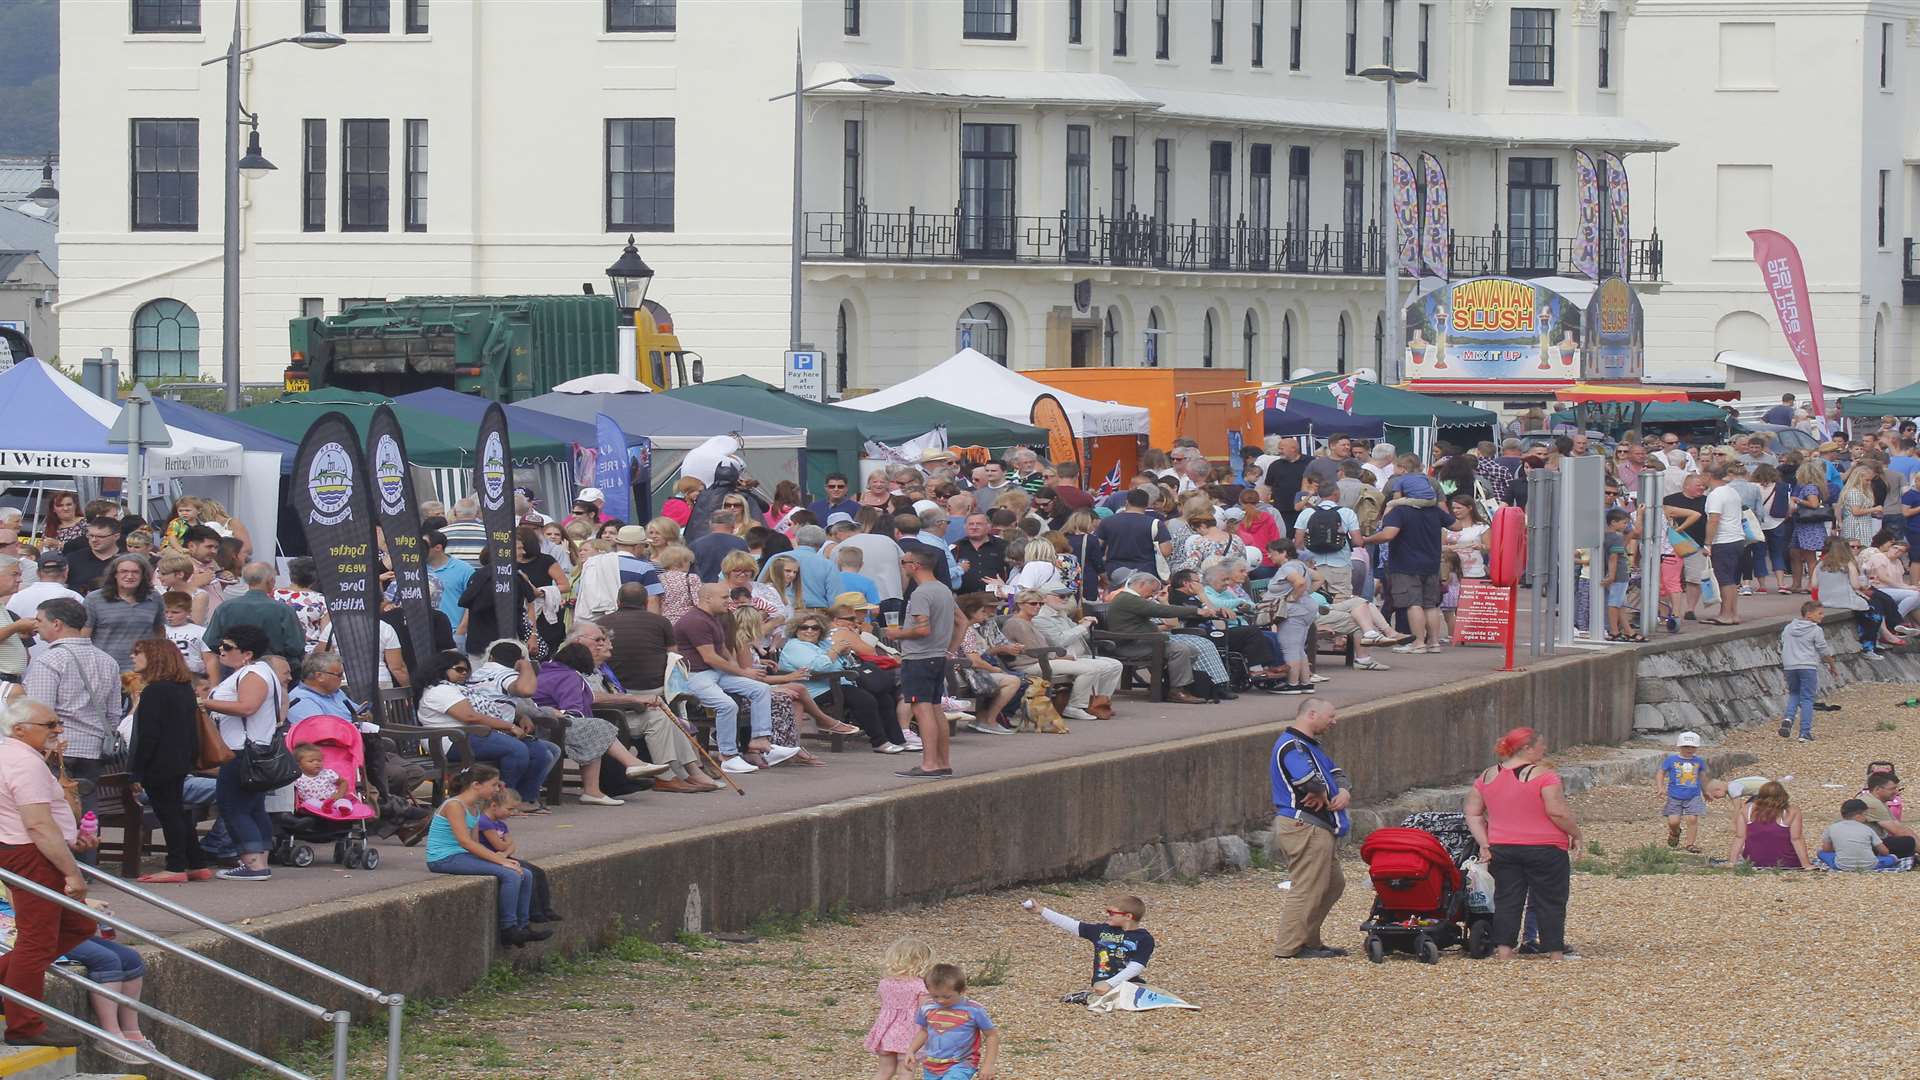 Last year's Dover Regatta was jam-packed with people despite a change in dates due to the continuation of Operation Stack